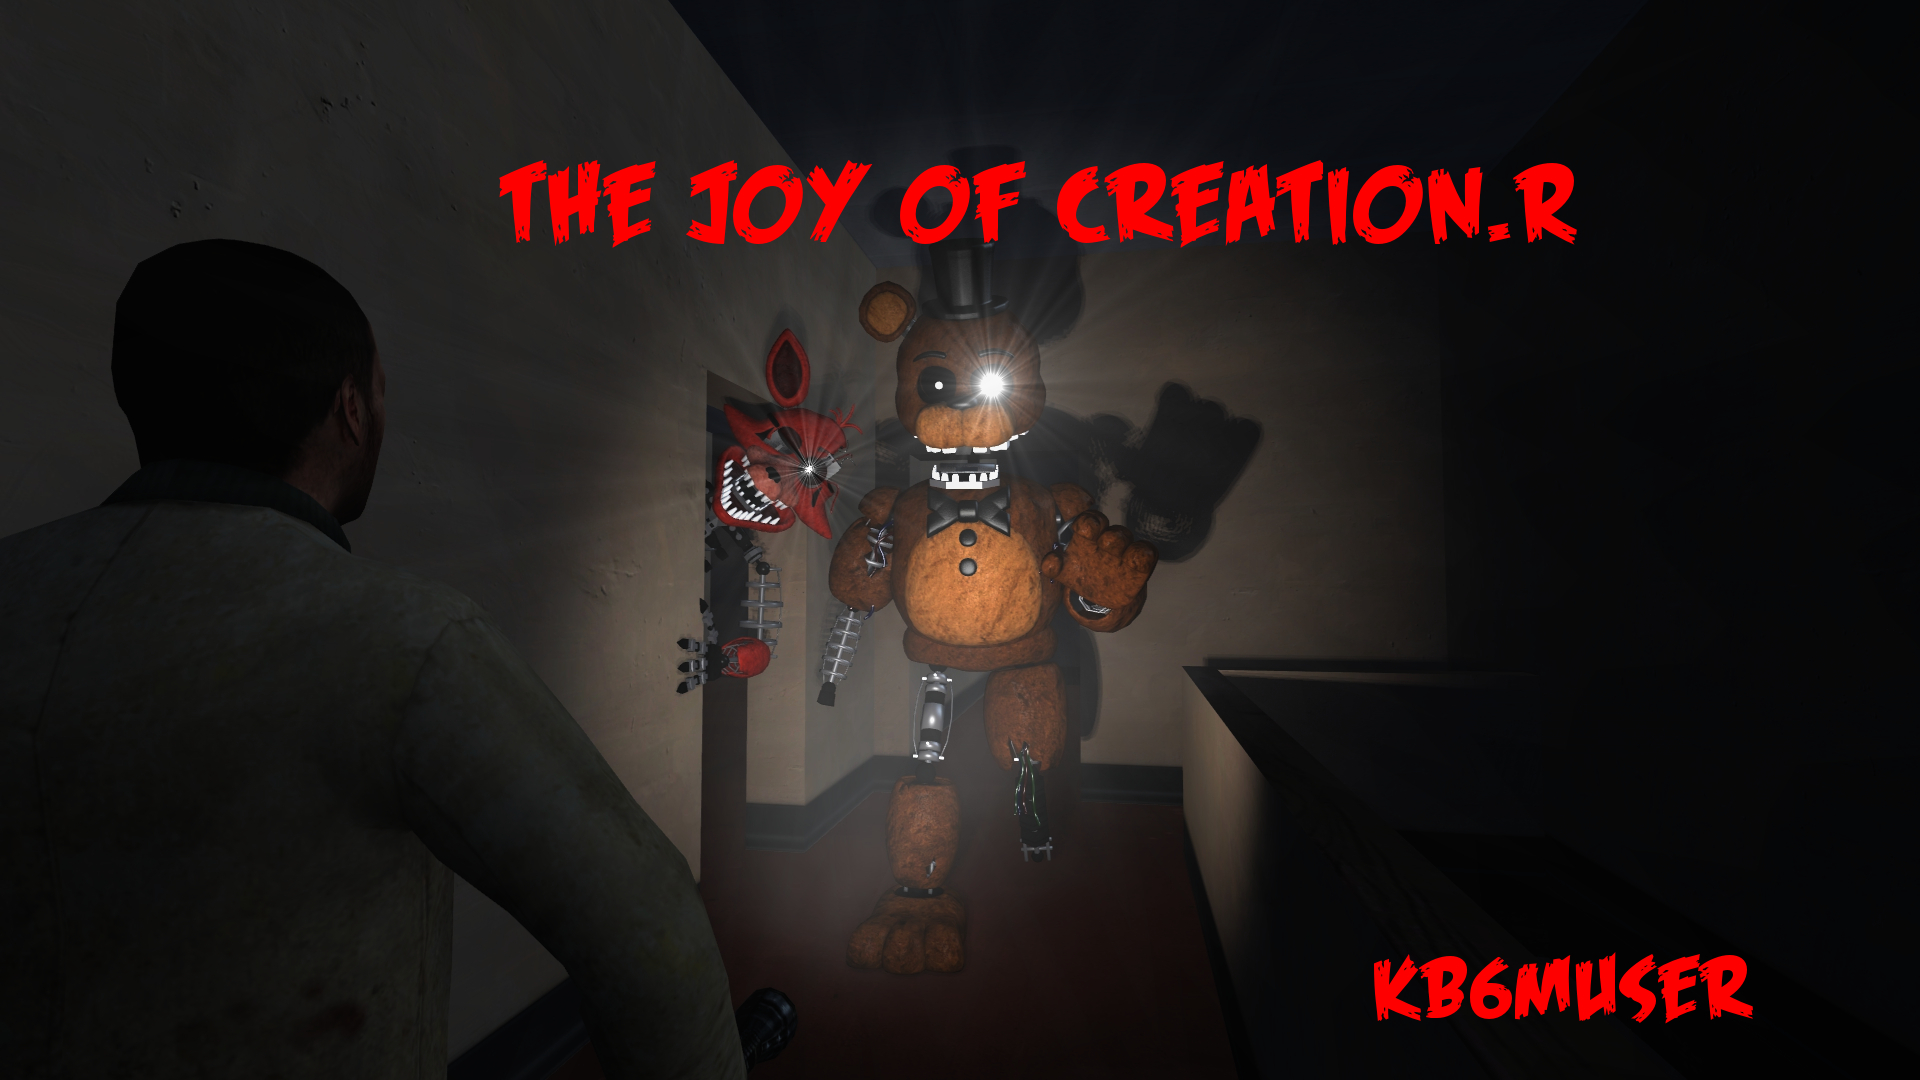 how to the joy of creation reborn